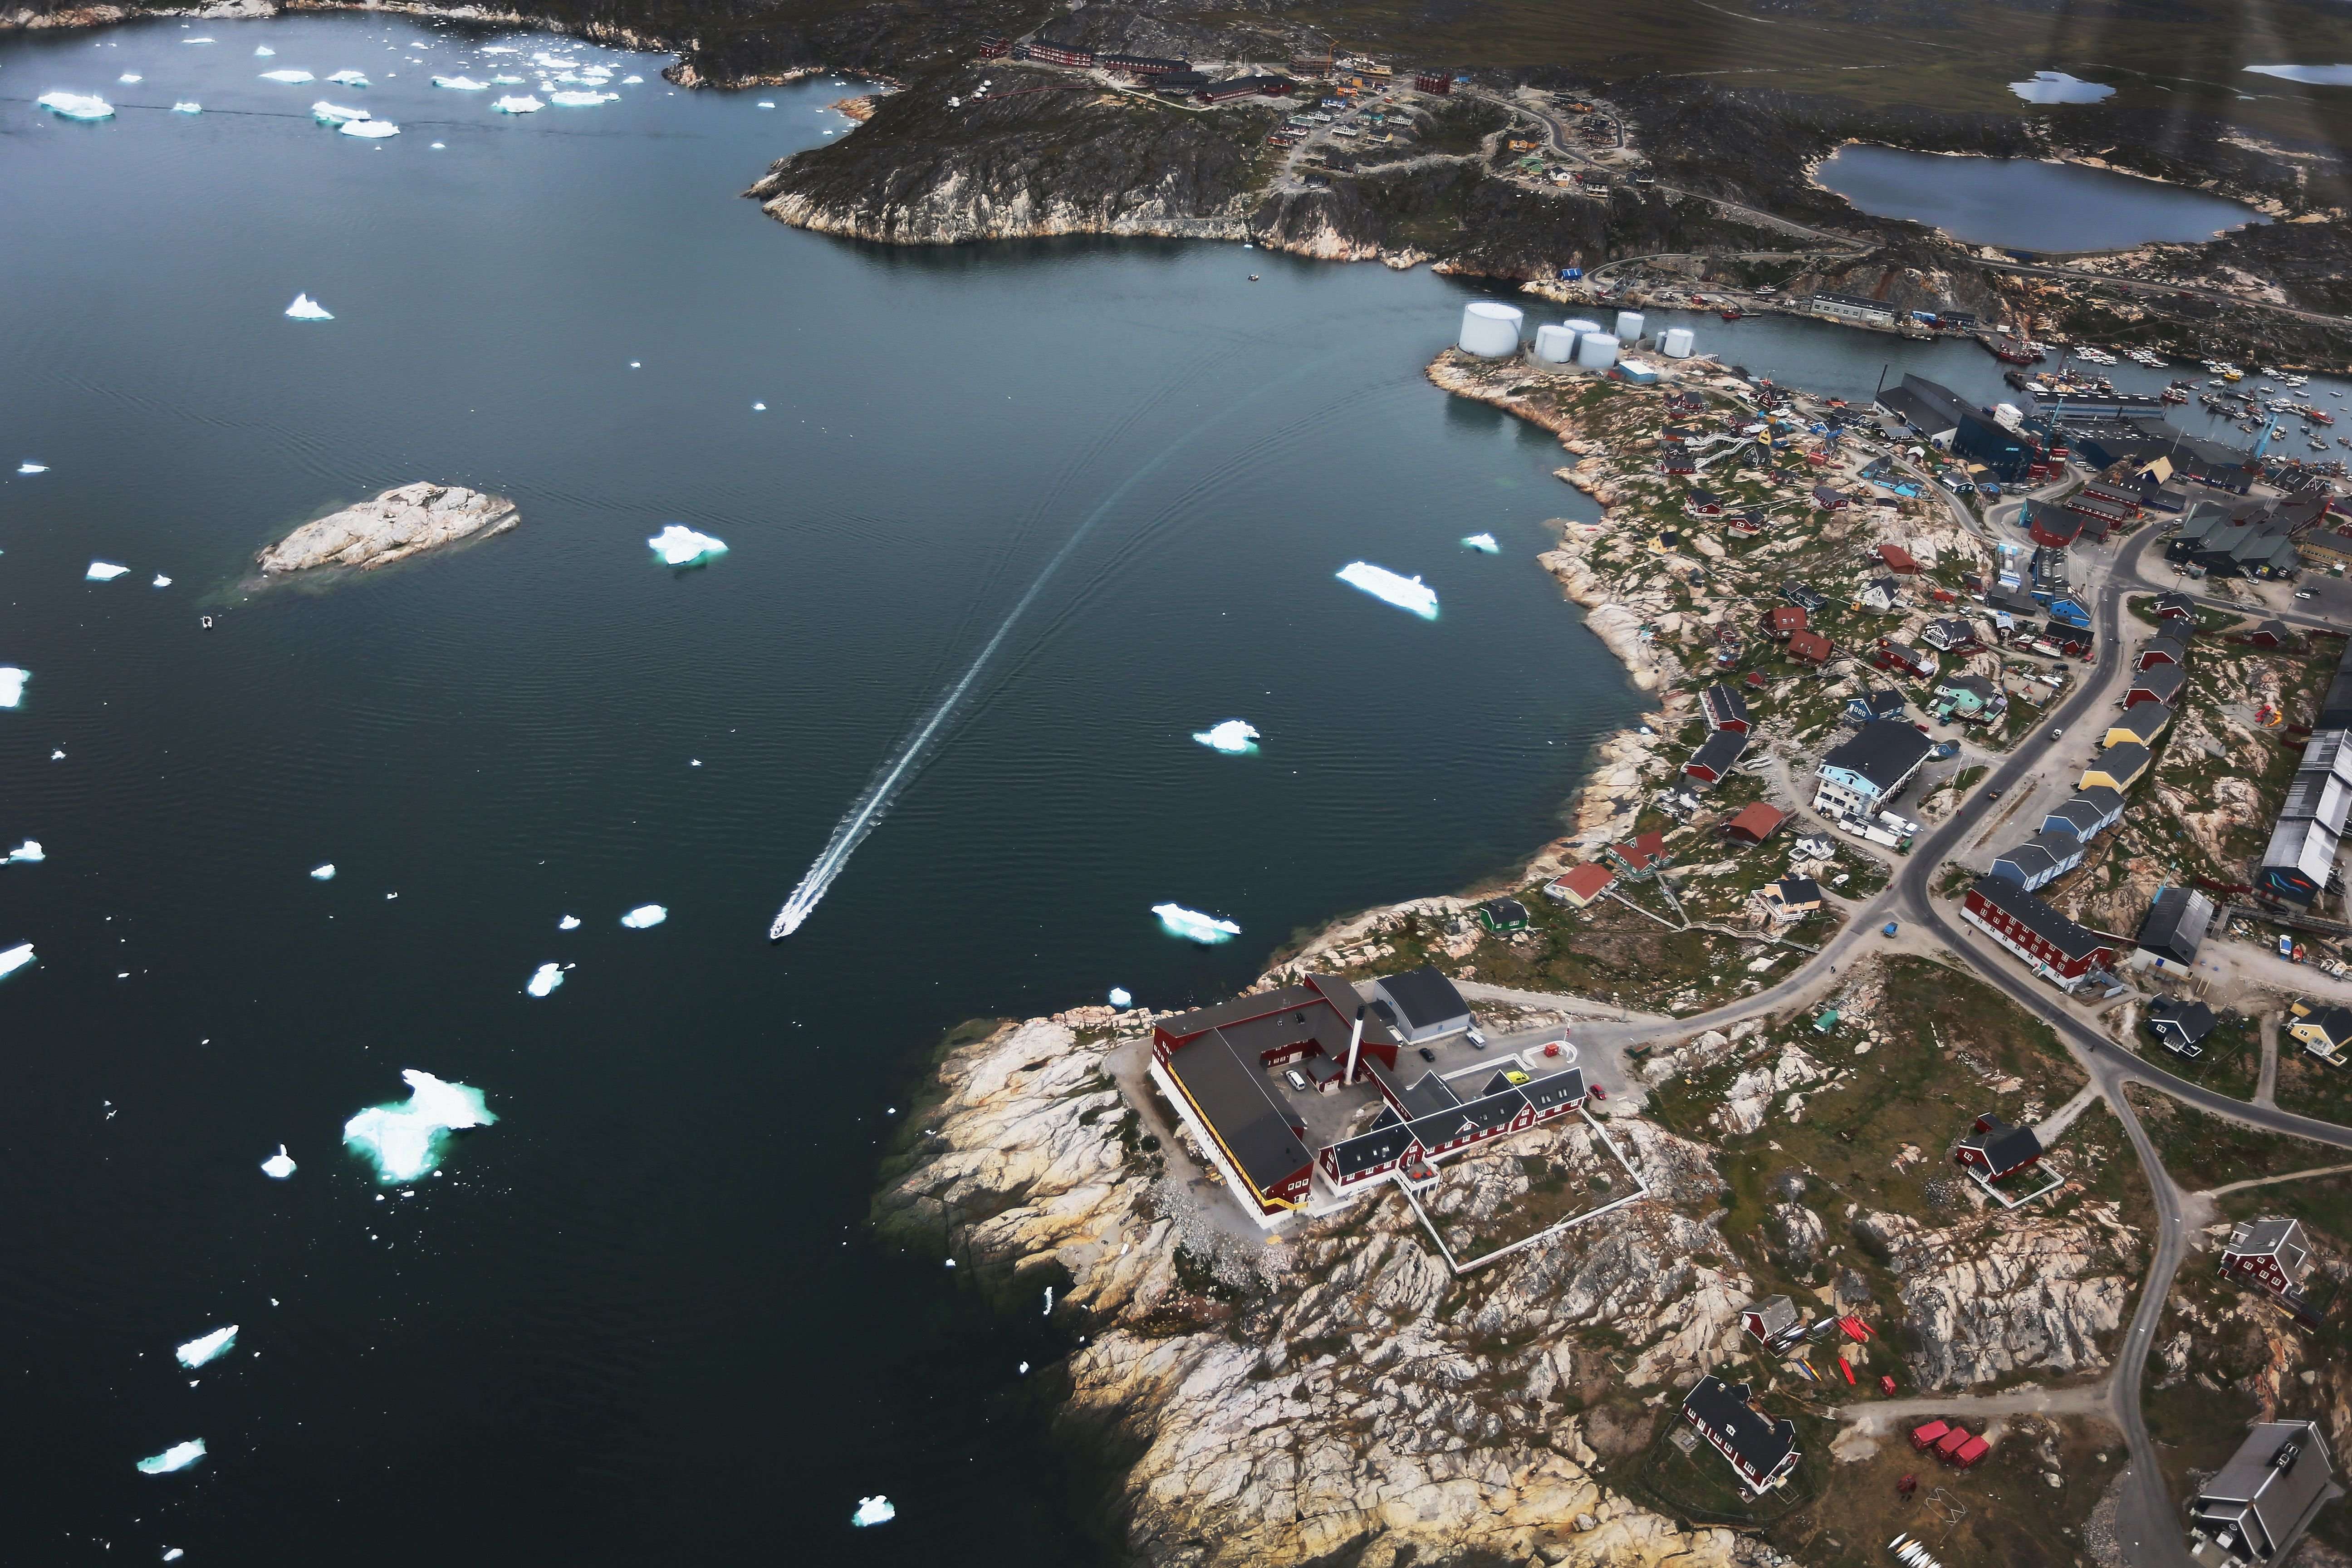 image for More Than 90 Scientists Release Report That Arctic Is ‘Unraveling’